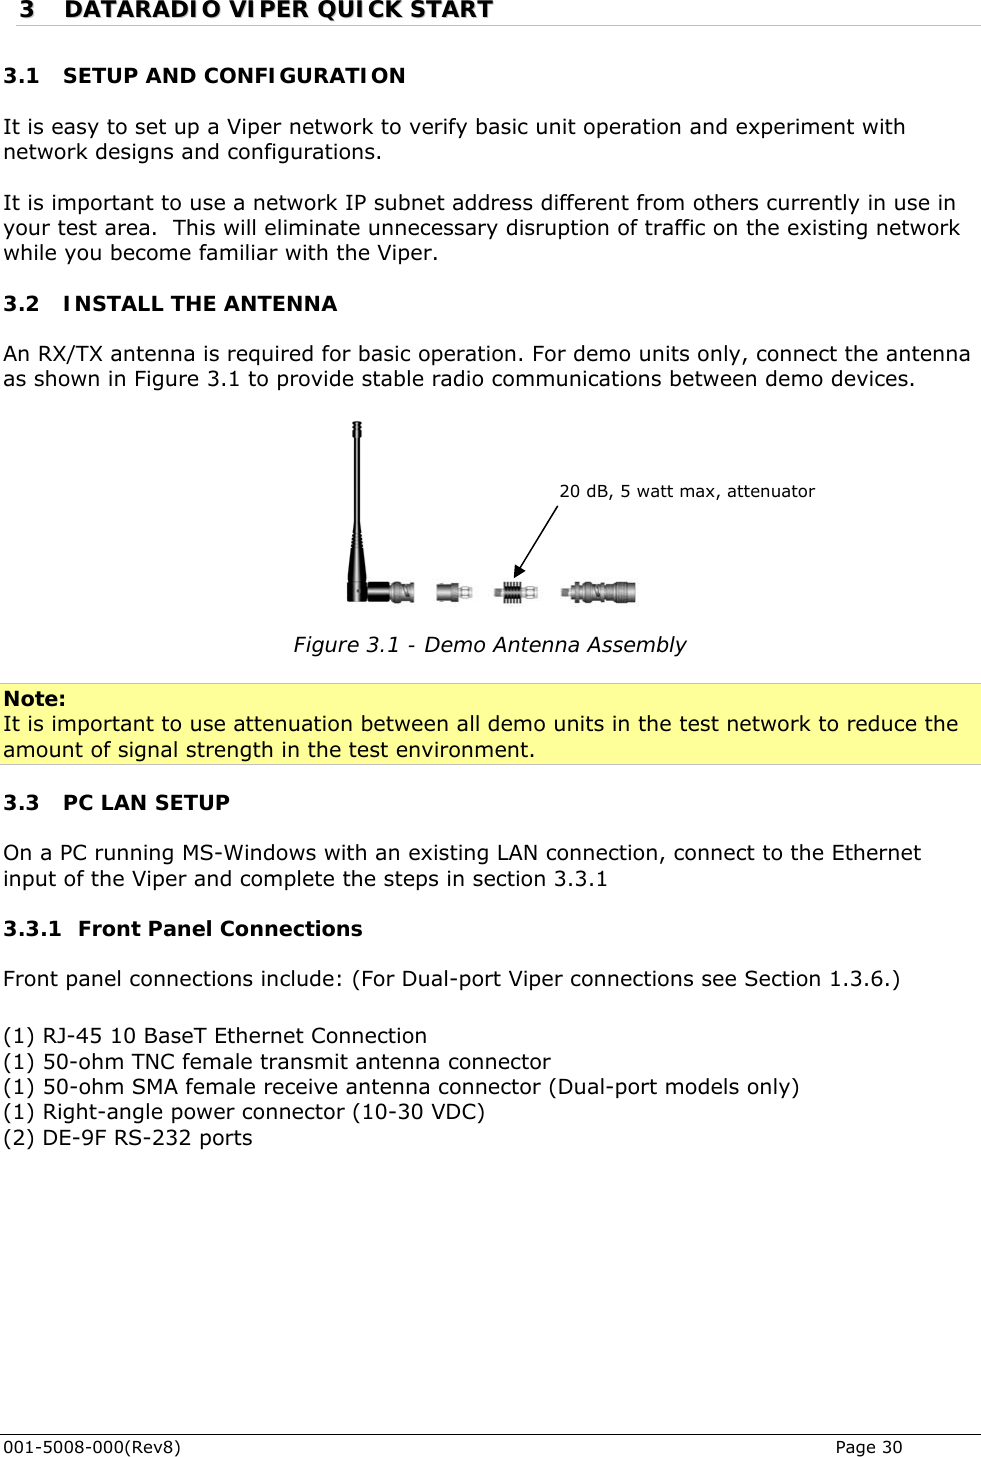  001-5008-000(Rev8)   Page 30 33  DDAATTAARRAADDIIOO  VVIIPPEERR  QQUUIICCKK  SSTTAARRTT  3.1 SETUP AND CONFIGURATION It is easy to set up a Viper network to verify basic unit operation and experiment with network designs and configurations.   It is important to use a network IP subnet address different from others currently in use in your test area.  This will eliminate unnecessary disruption of traffic on the existing network while you become familiar with the Viper.  3.2 INSTALL THE ANTENNA An RX/TX antenna is required for basic operation. For demo units only, connect the antenna as shown in Figure 3.1 to provide stable radio communications between demo devices.    20 dB, 5 watt max, attenuator Figure 3.1 - Demo Antenna Assembly  Note: It is important to use attenuation between all demo units in the test network to reduce the amount of signal strength in the test environment.  3.3 PC LAN SETUP On a PC running MS-Windows with an existing LAN connection, connect to the Ethernet input of the Viper and complete the steps in section 3.3.1 3.3.1 Front Panel Connections Front panel connections include: (For Dual-port Viper connections see Section 1.3.6.)  (1) RJ-45 10 BaseT Ethernet Connection  (1) 50-ohm TNC female transmit antenna connector  (1) 50-ohm SMA female receive antenna connector (Dual-port models only) (1) Right-angle power connector (10-30 VDC) (2) DE-9F RS-232 ports  